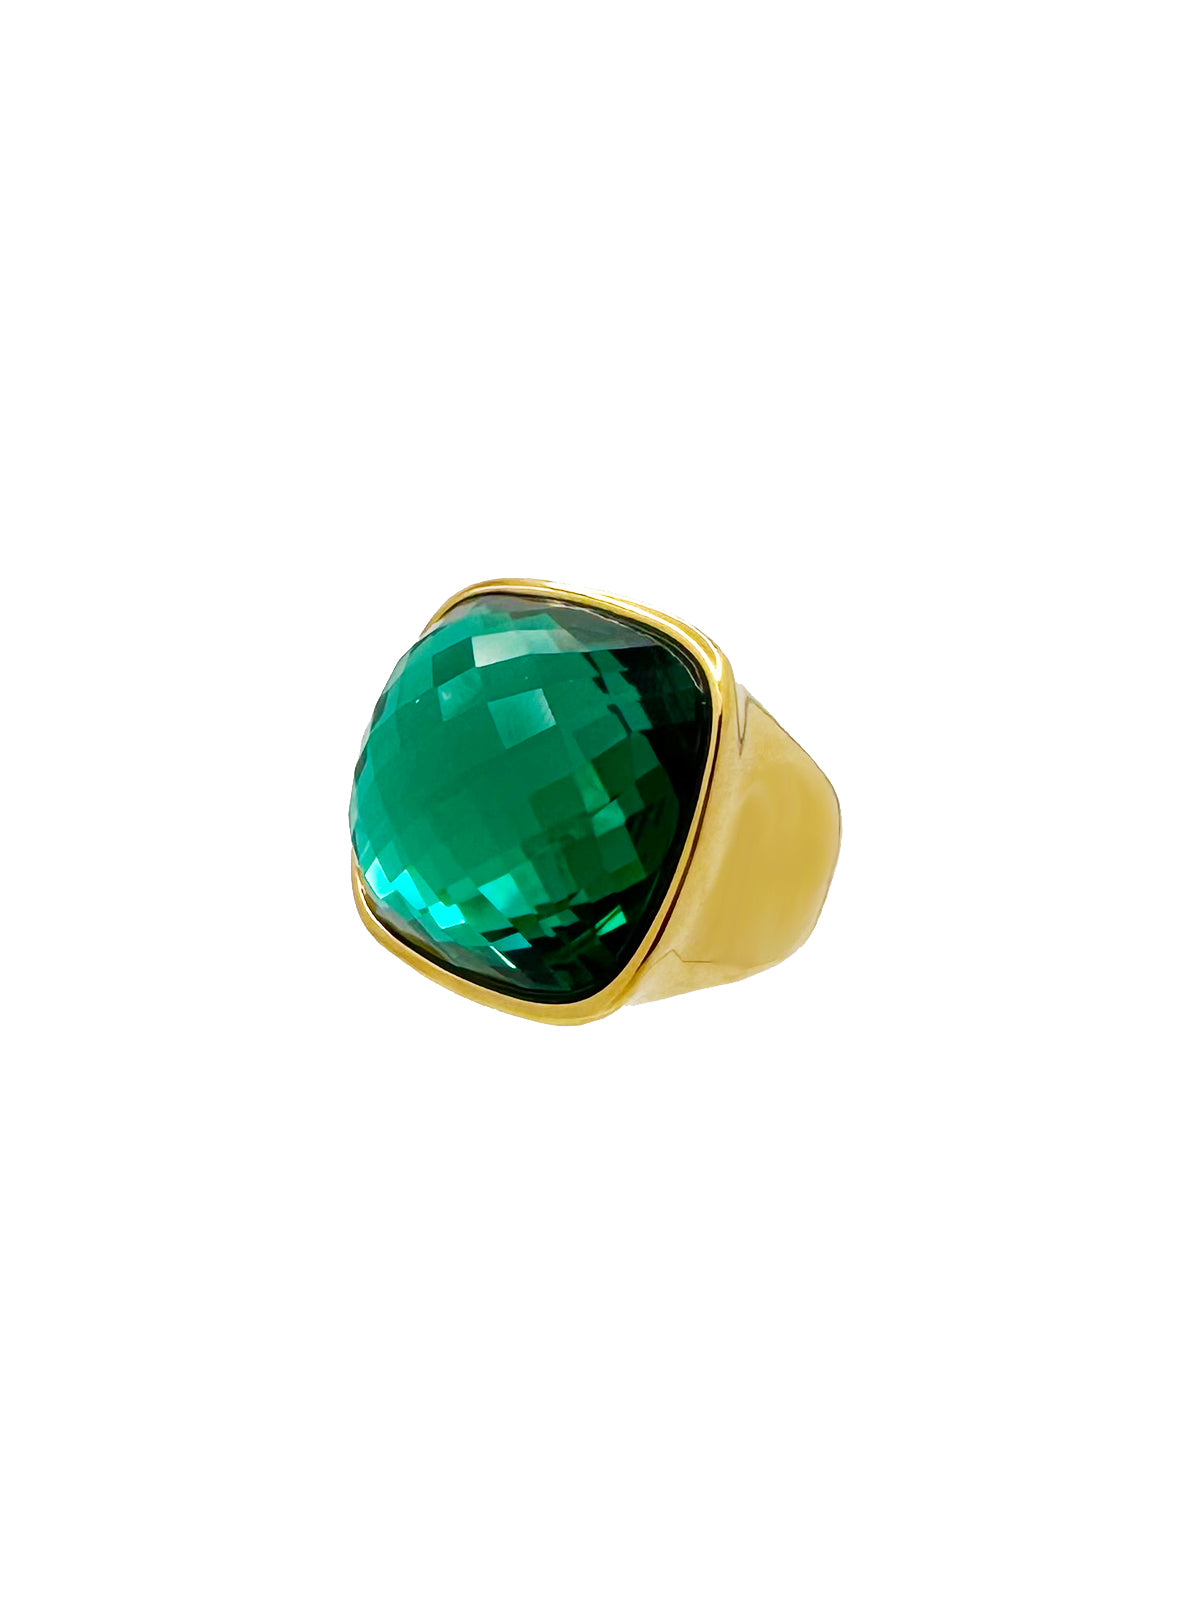 COCKTAIL RING - EMERALD